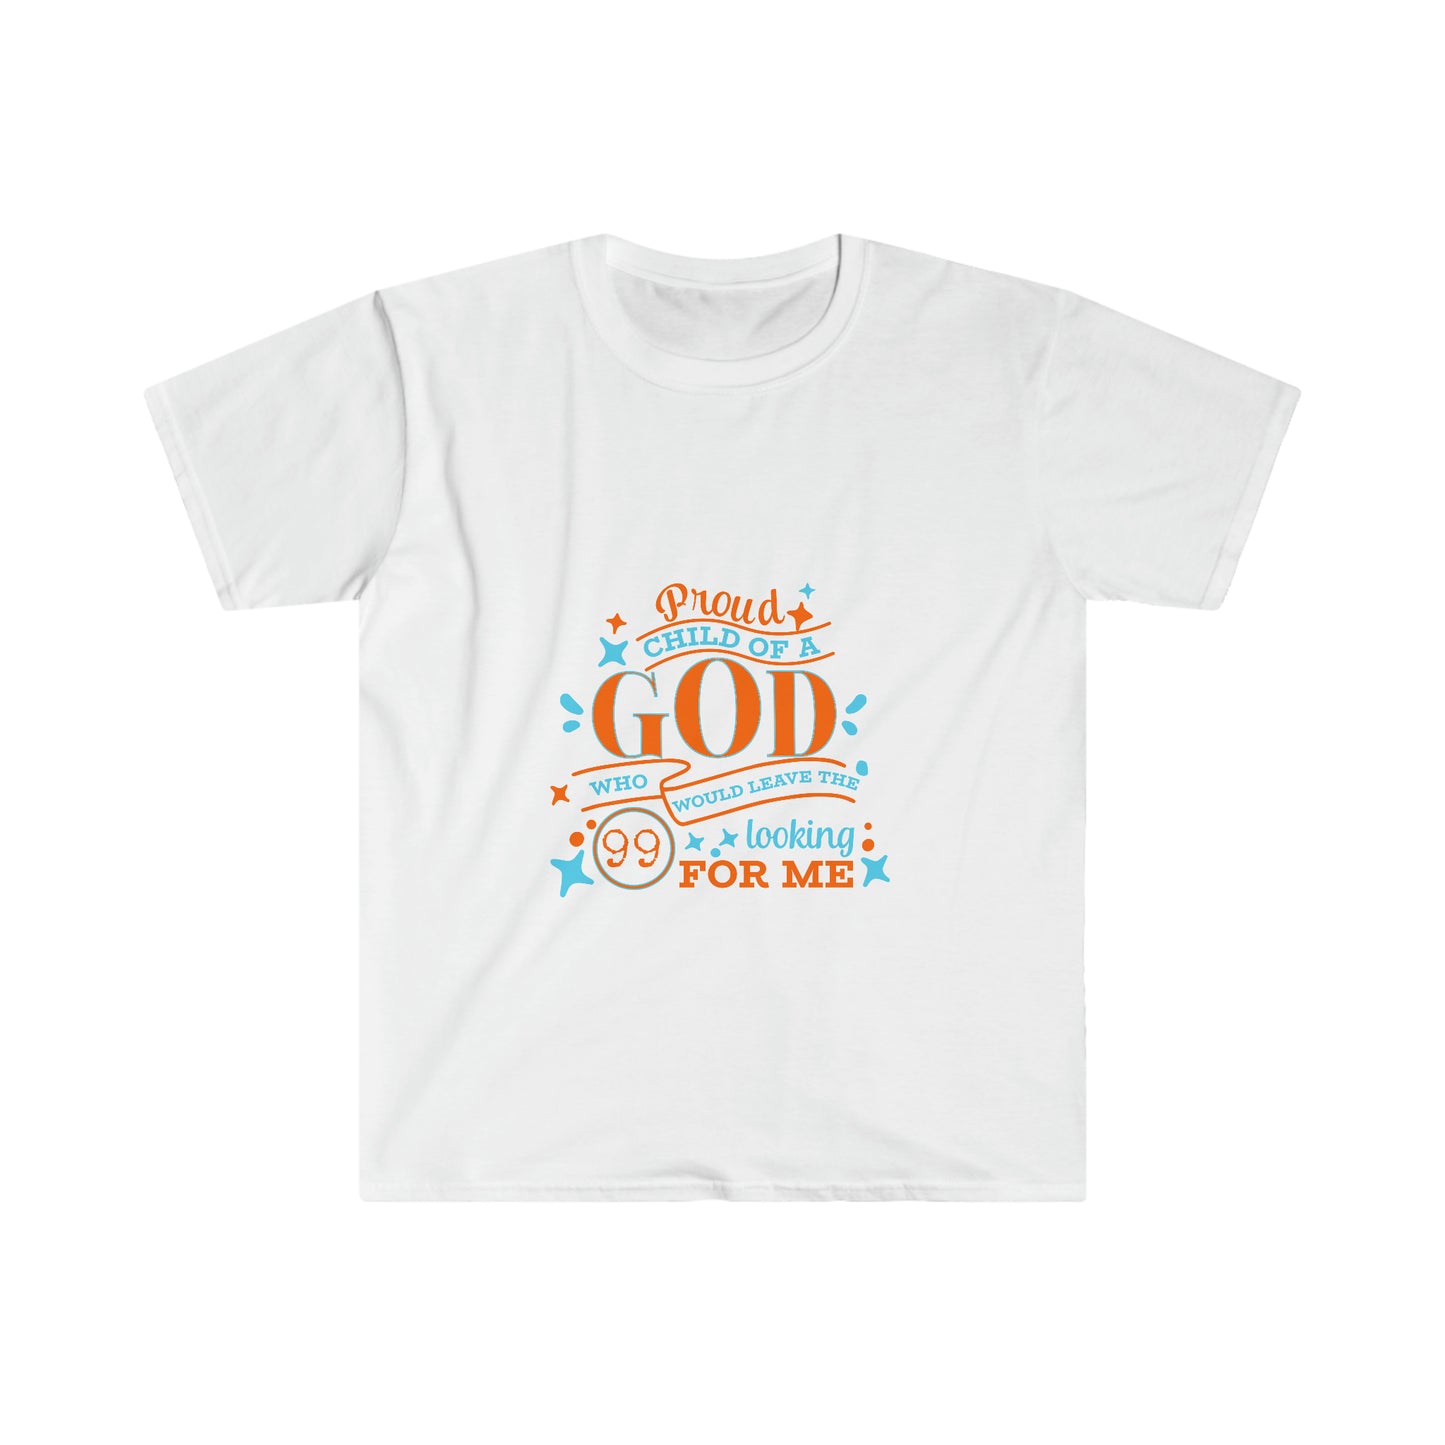 Proud Child Of A God Who Would Leave The 99 Looking For Me Unisex T-shirt